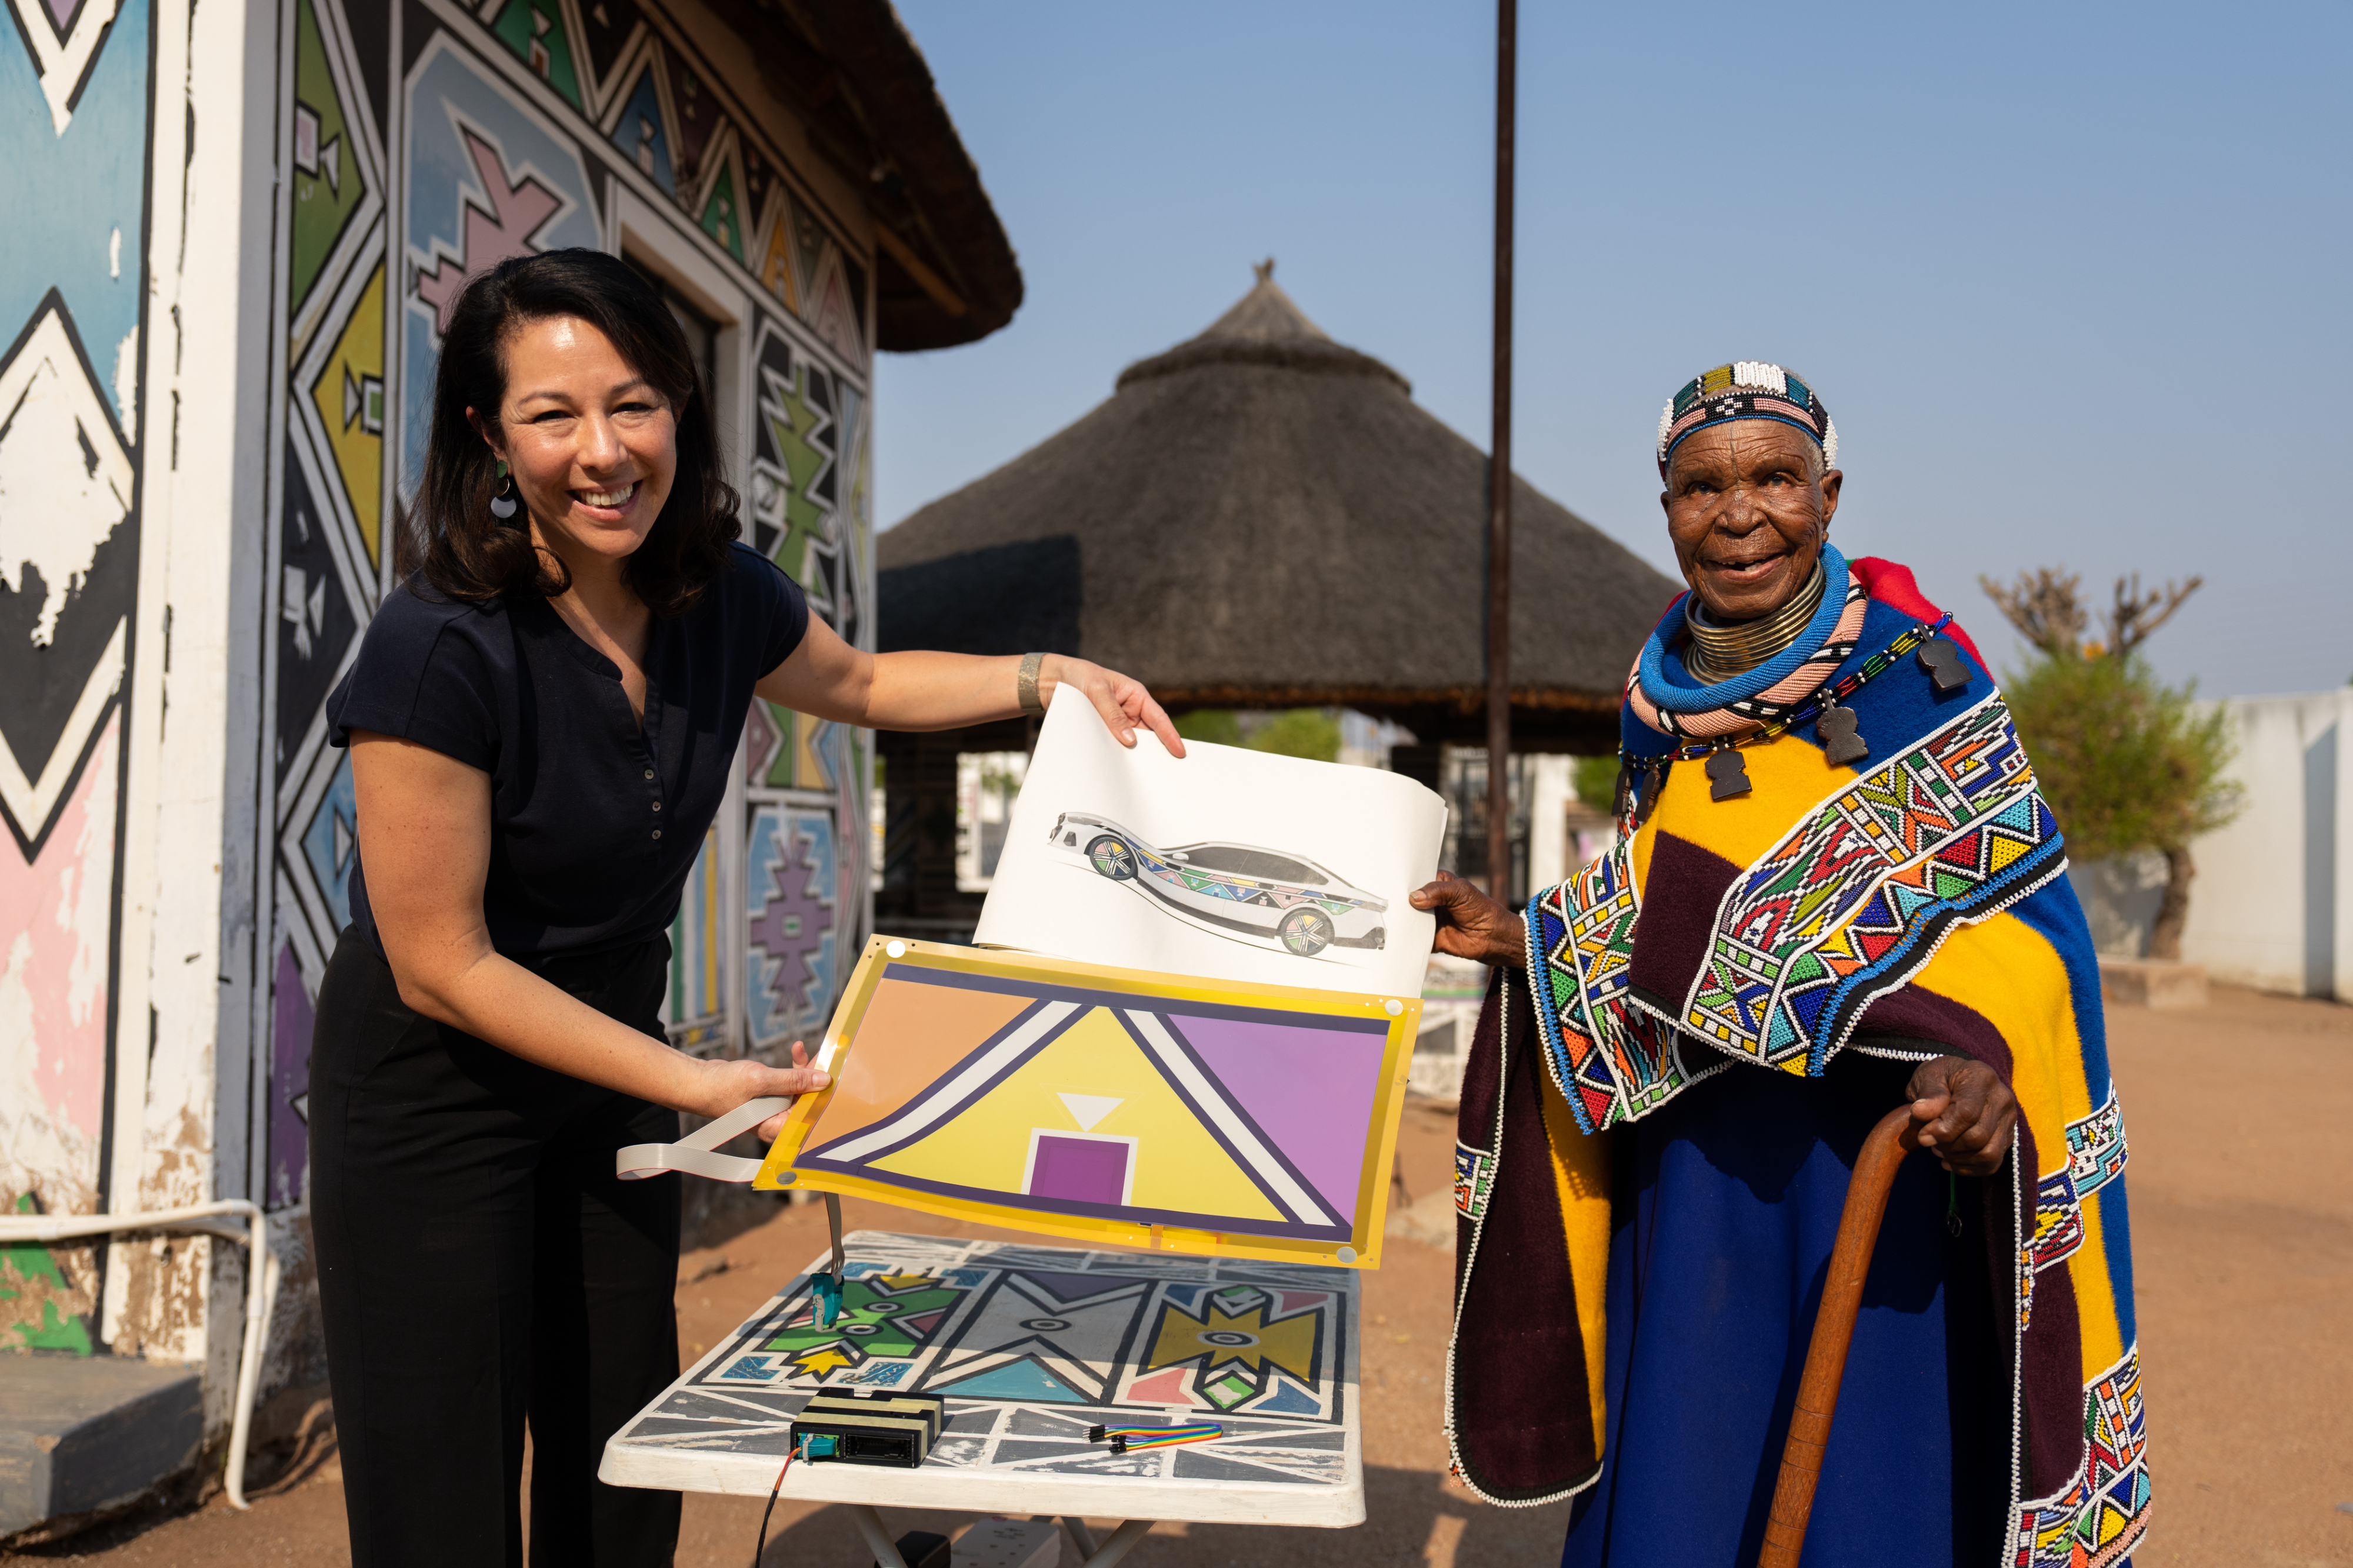 Two individuals presenting a piece of artwork outside with traditional hut and mural in the background. One is wearing cultural attire